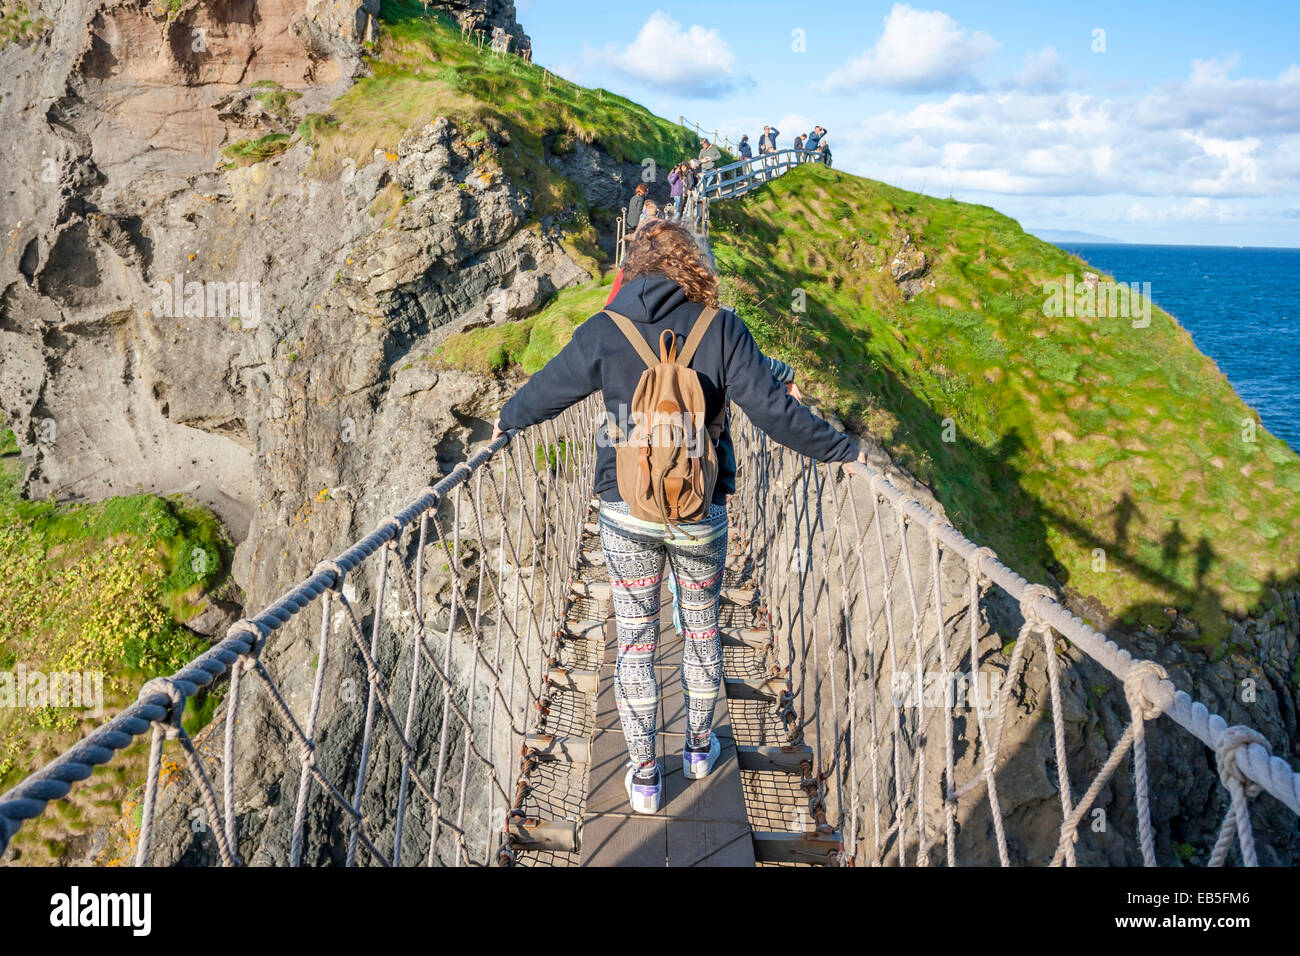 Belfast, Northern Ireland - Aug 19, 2014: People crossing the Rope Bridge: Carrick a rede in North Antrim, Northern Ireland on A Stock Photo